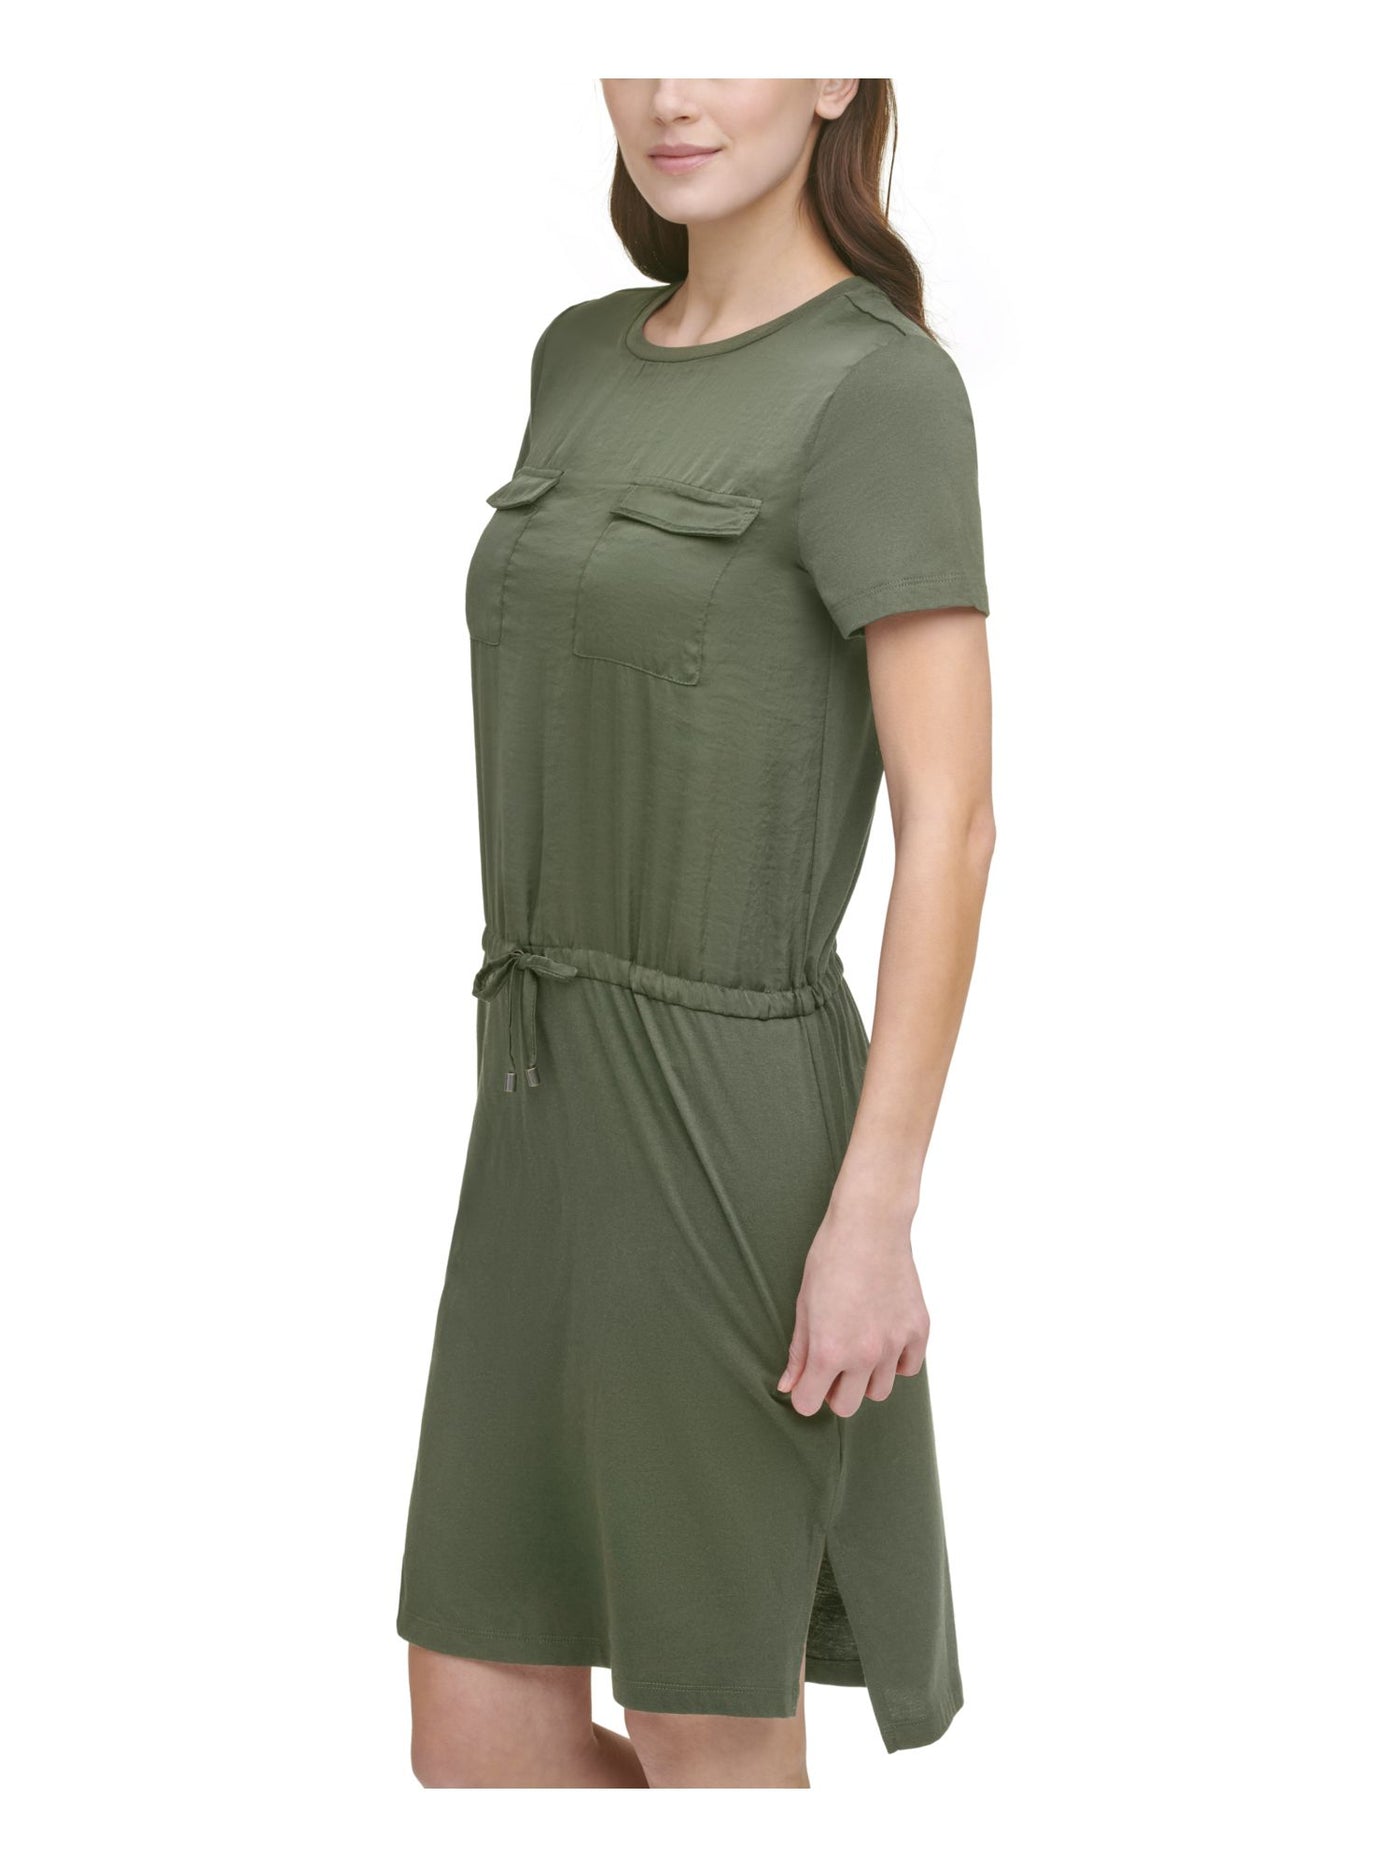 DKNY Womens Green Pocketed Slitted Drawstring T-shirt Style Short Sleeve Crew Neck Above The Knee Wear To Work Shirt Dress XS